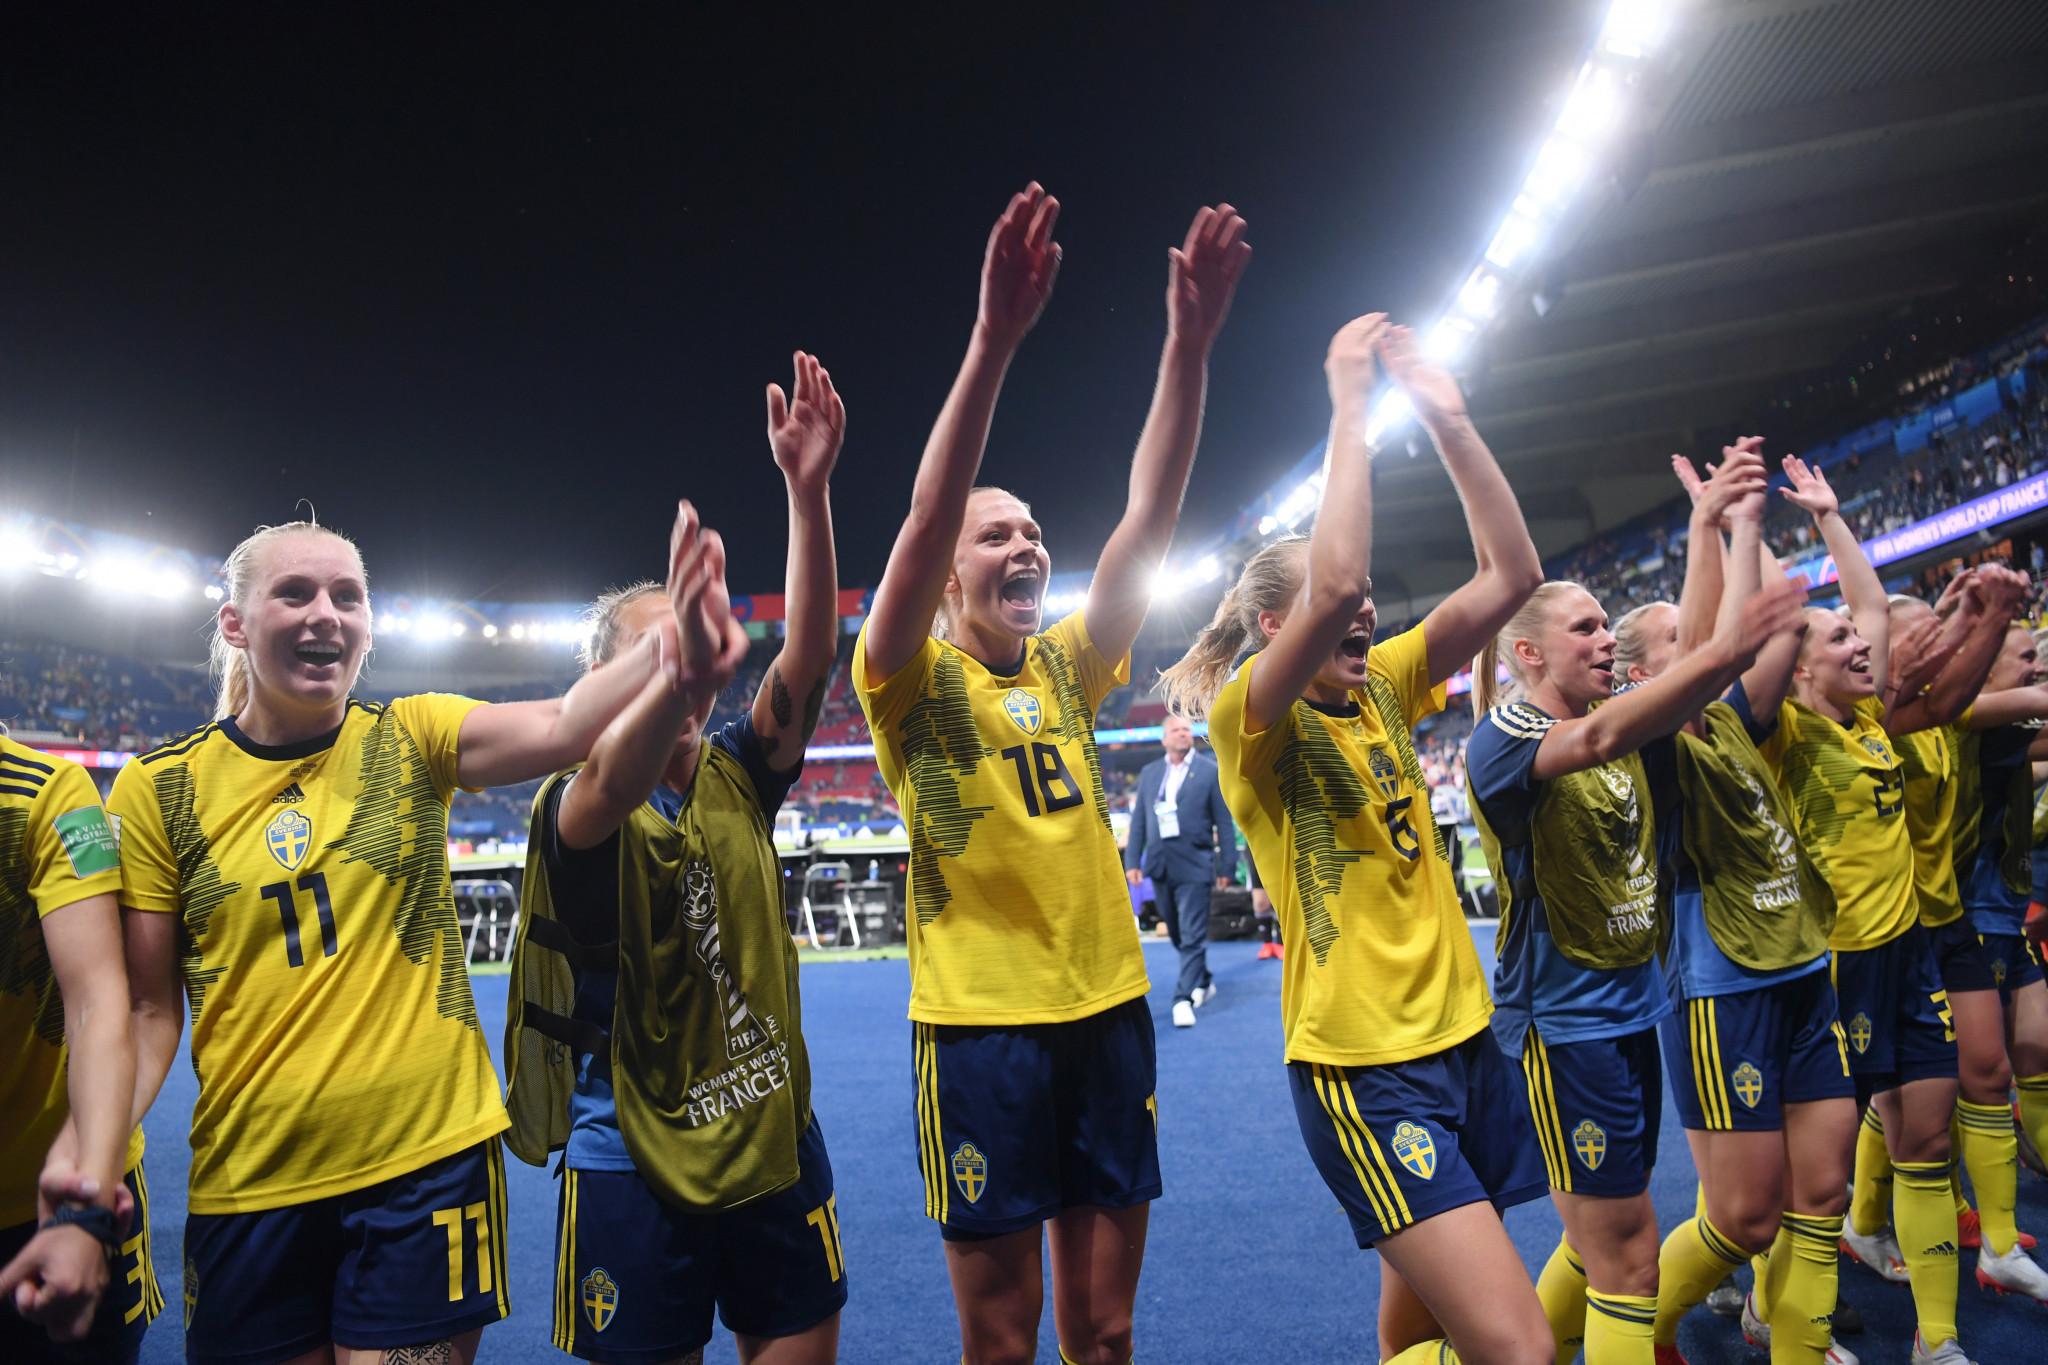 But the penalty was not given and Swedish celebrations could continue ©Getty Images